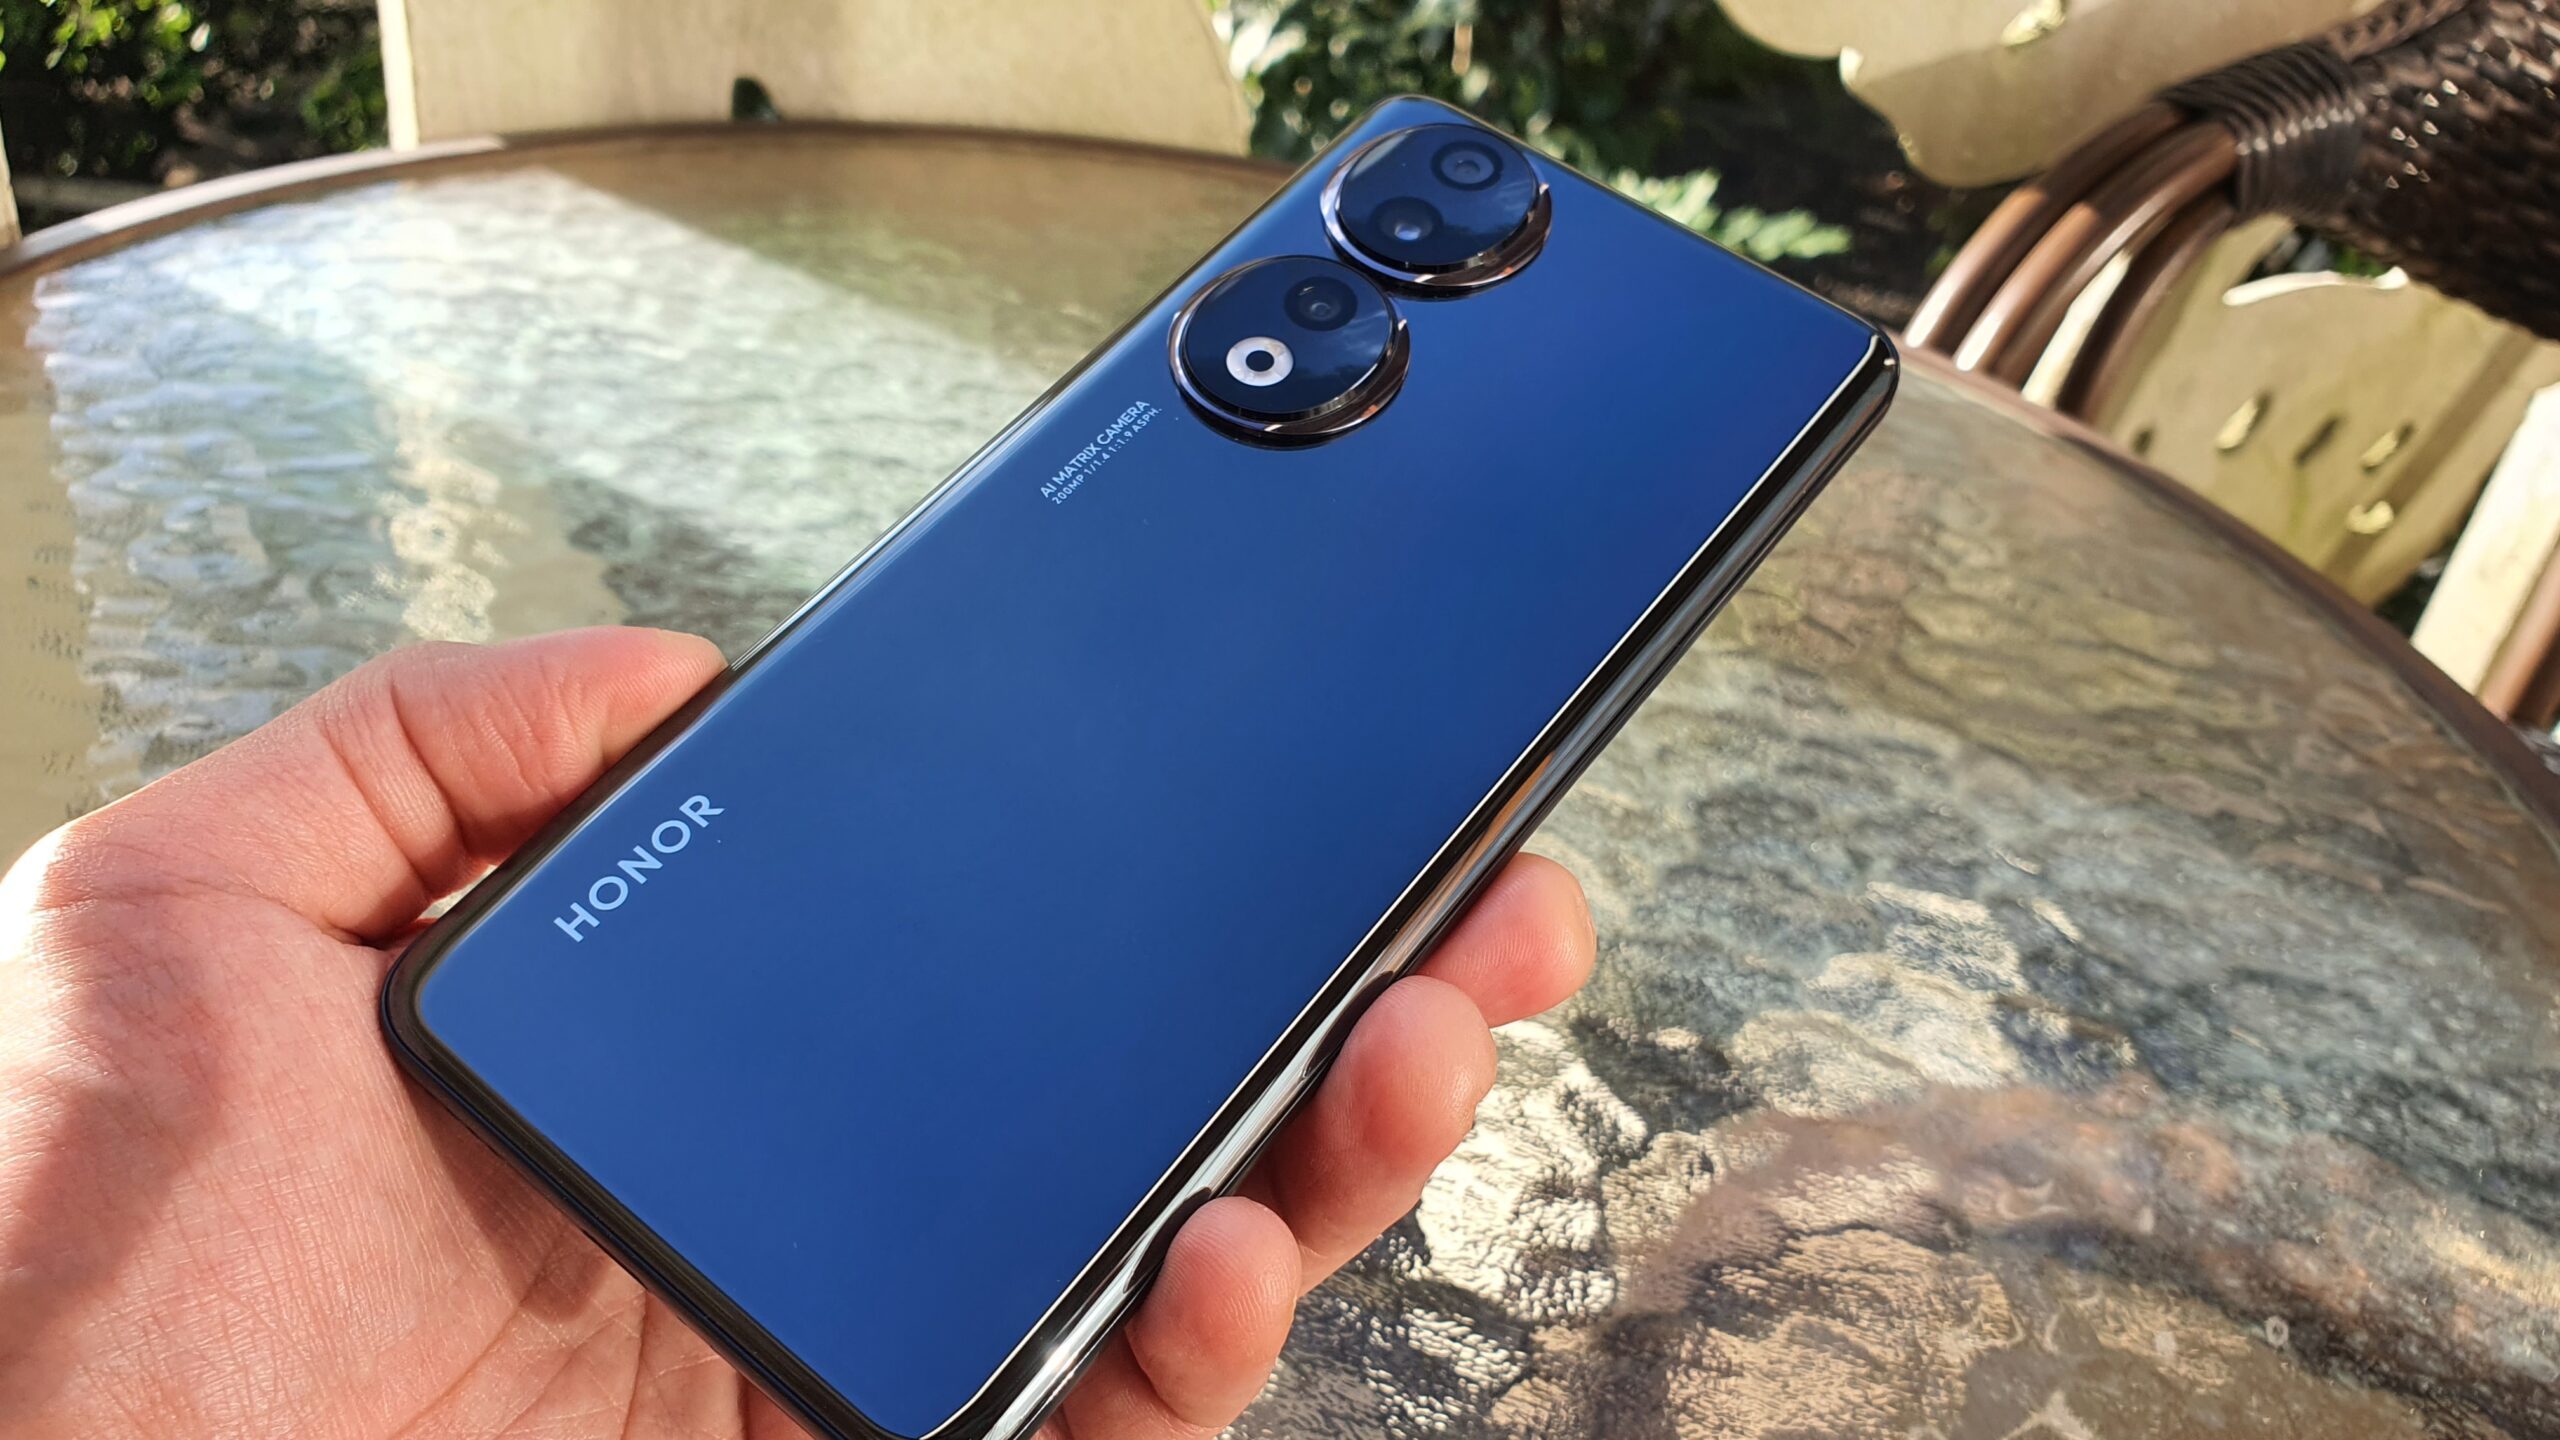 Honor 90, Honor 90 Pro With 200-Megapixel Cameras, 120Hz OLED Displays  Launched: Price, Specifications